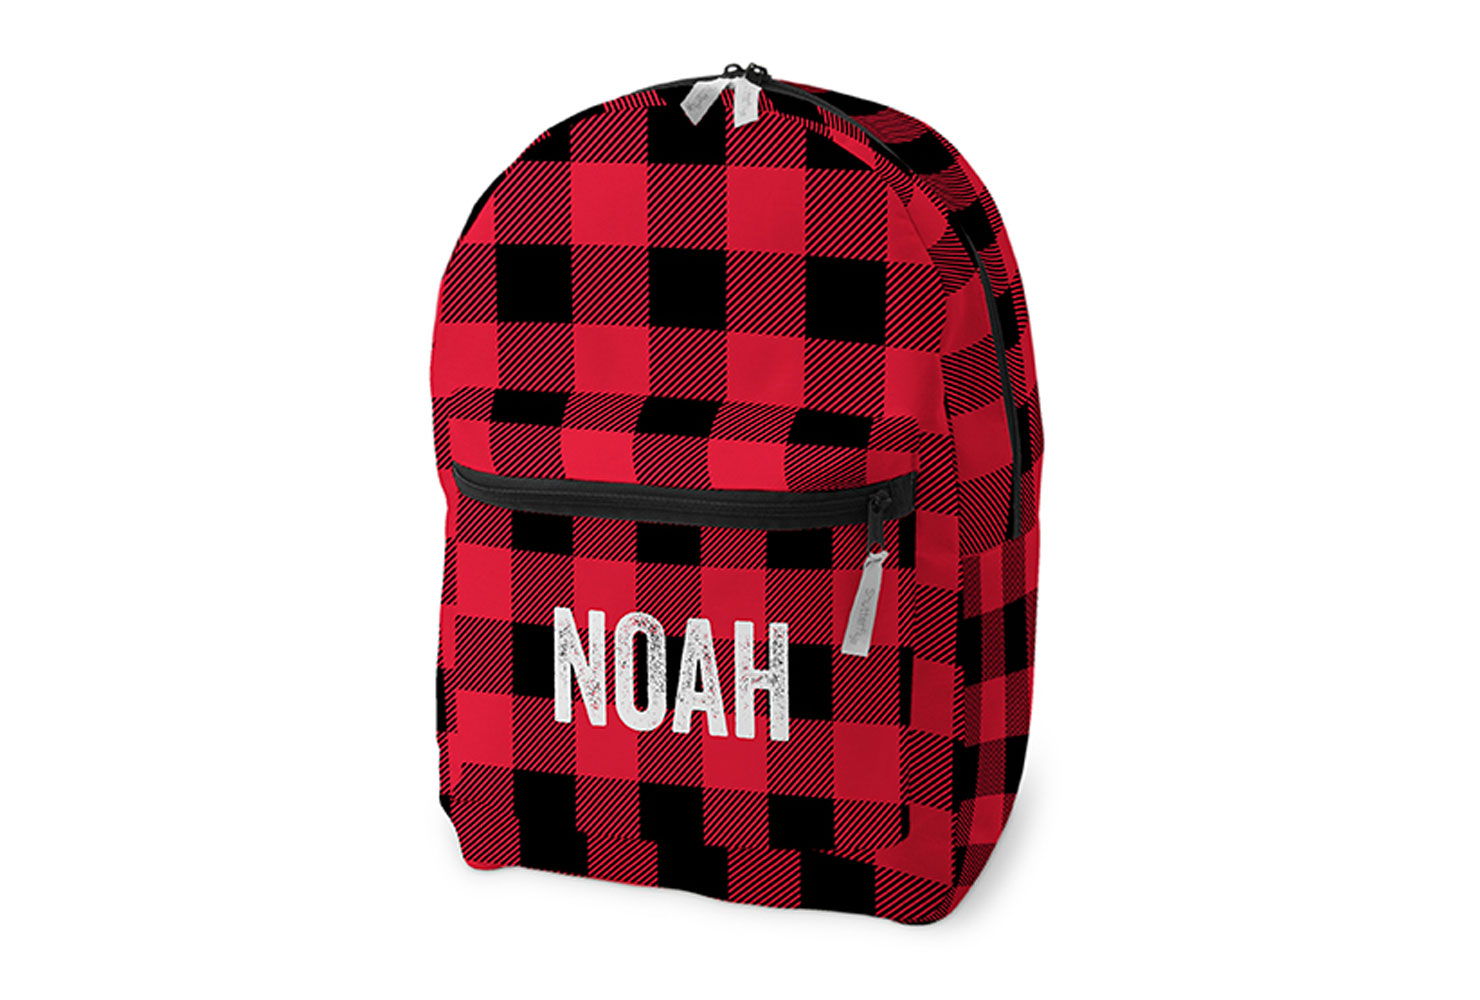 Plaid red and black backpack for kids.